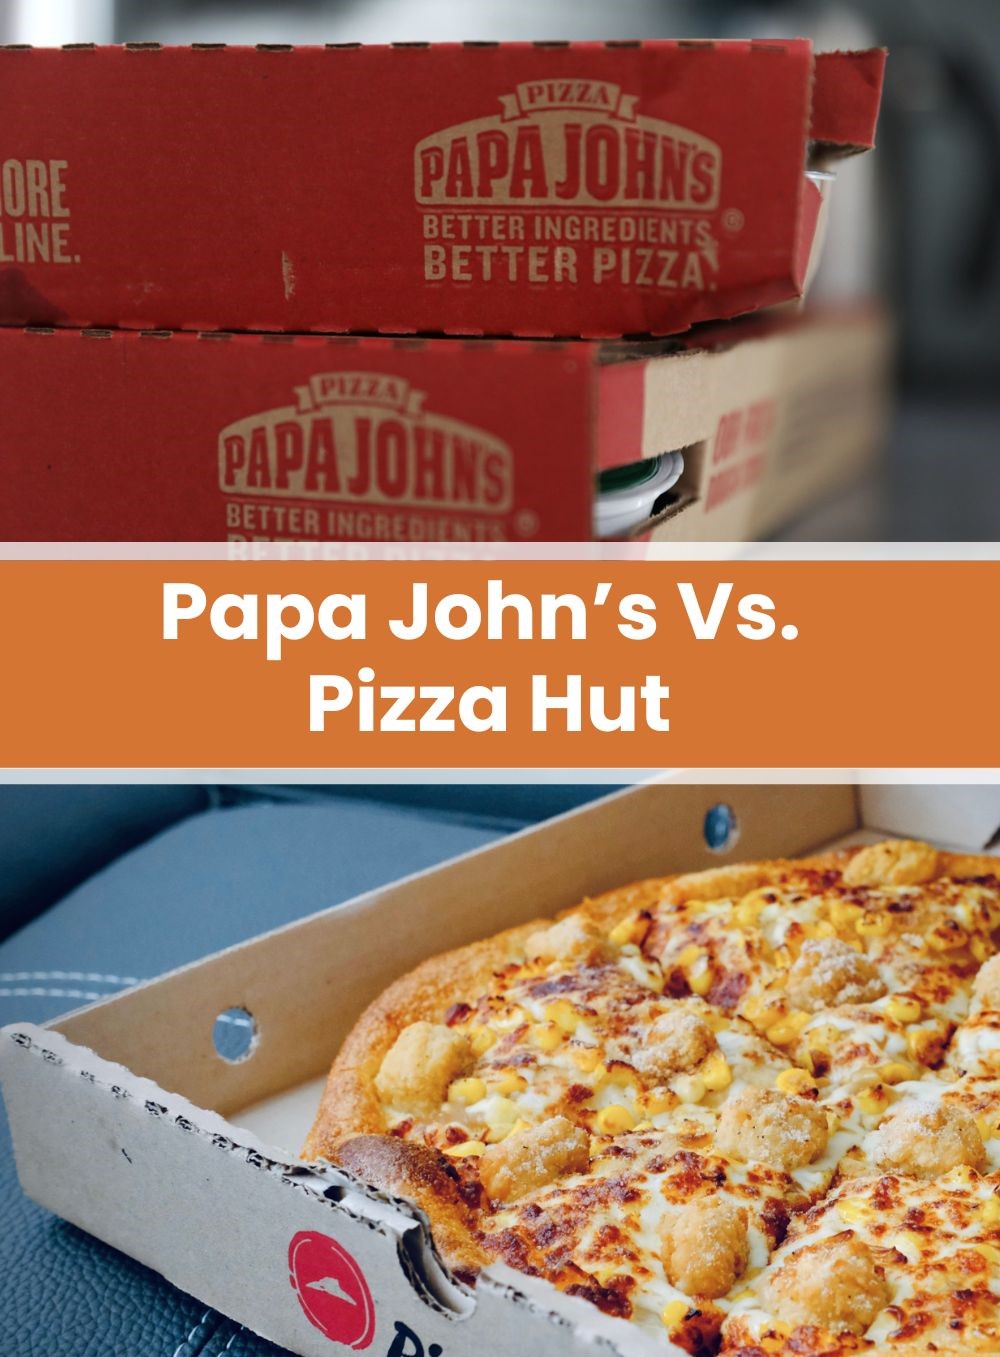 Papa John's pizza in its cardboard box, next to Pizza Hut pizza, with text comparing the two pizza chains.